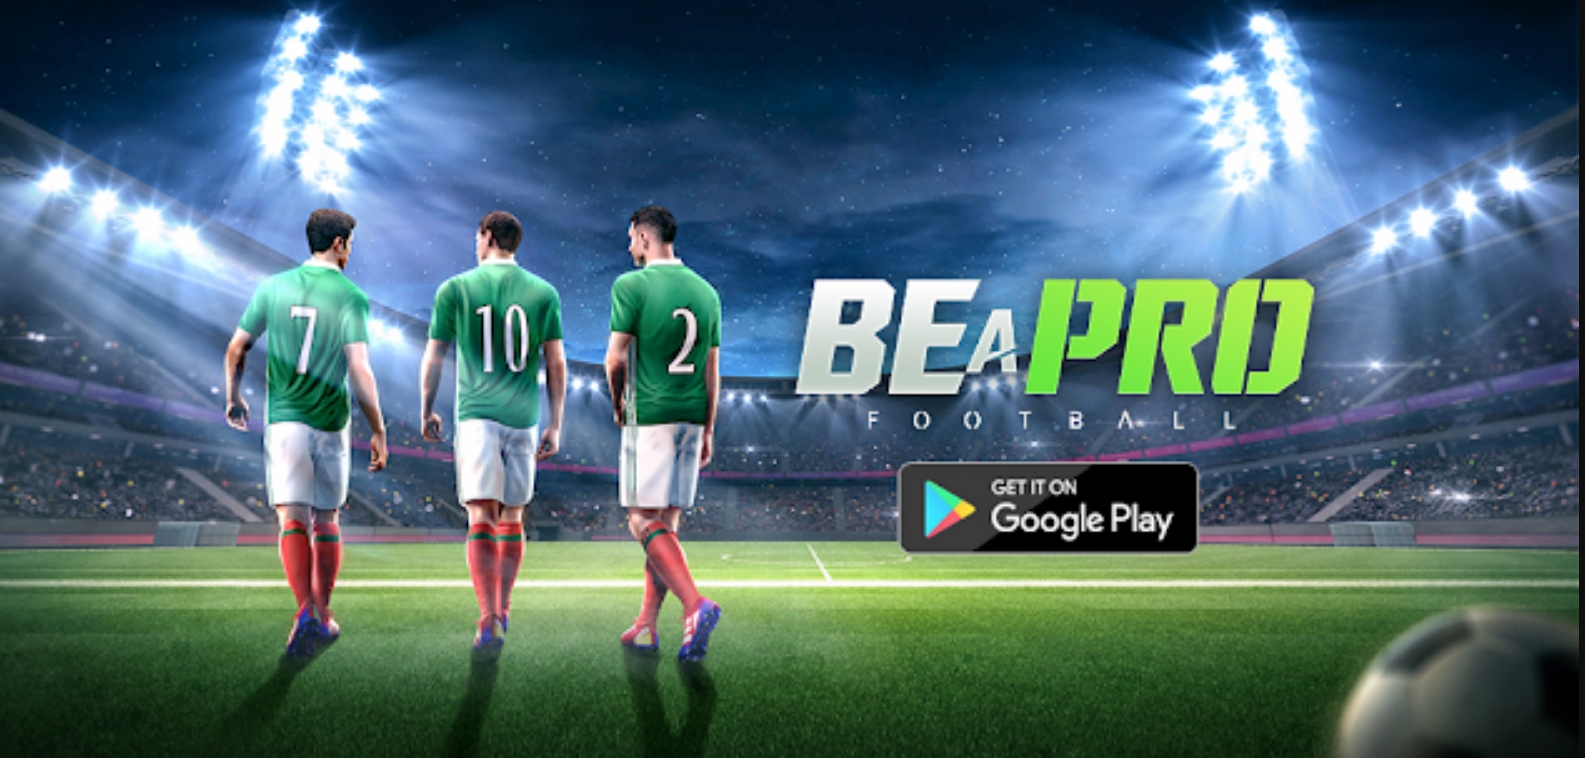 Download Be a Pro